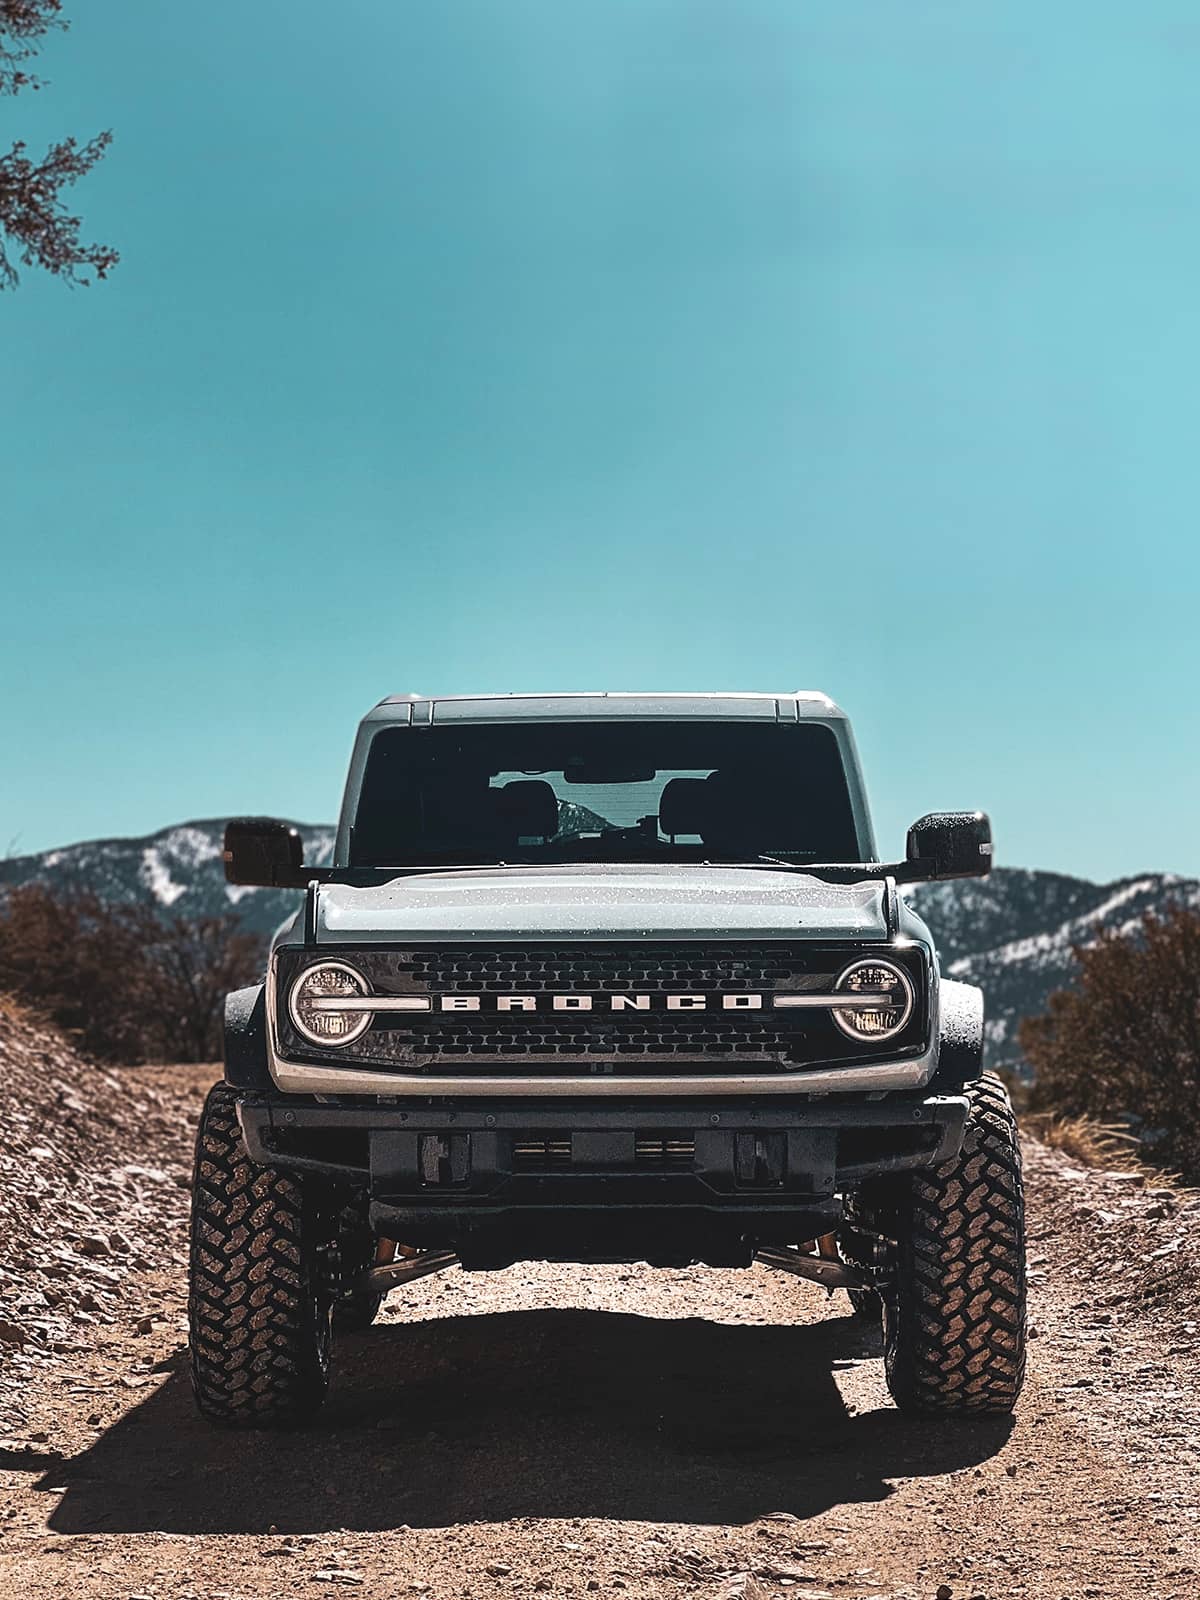 New Ford Bronco - perfect off-road vehicle